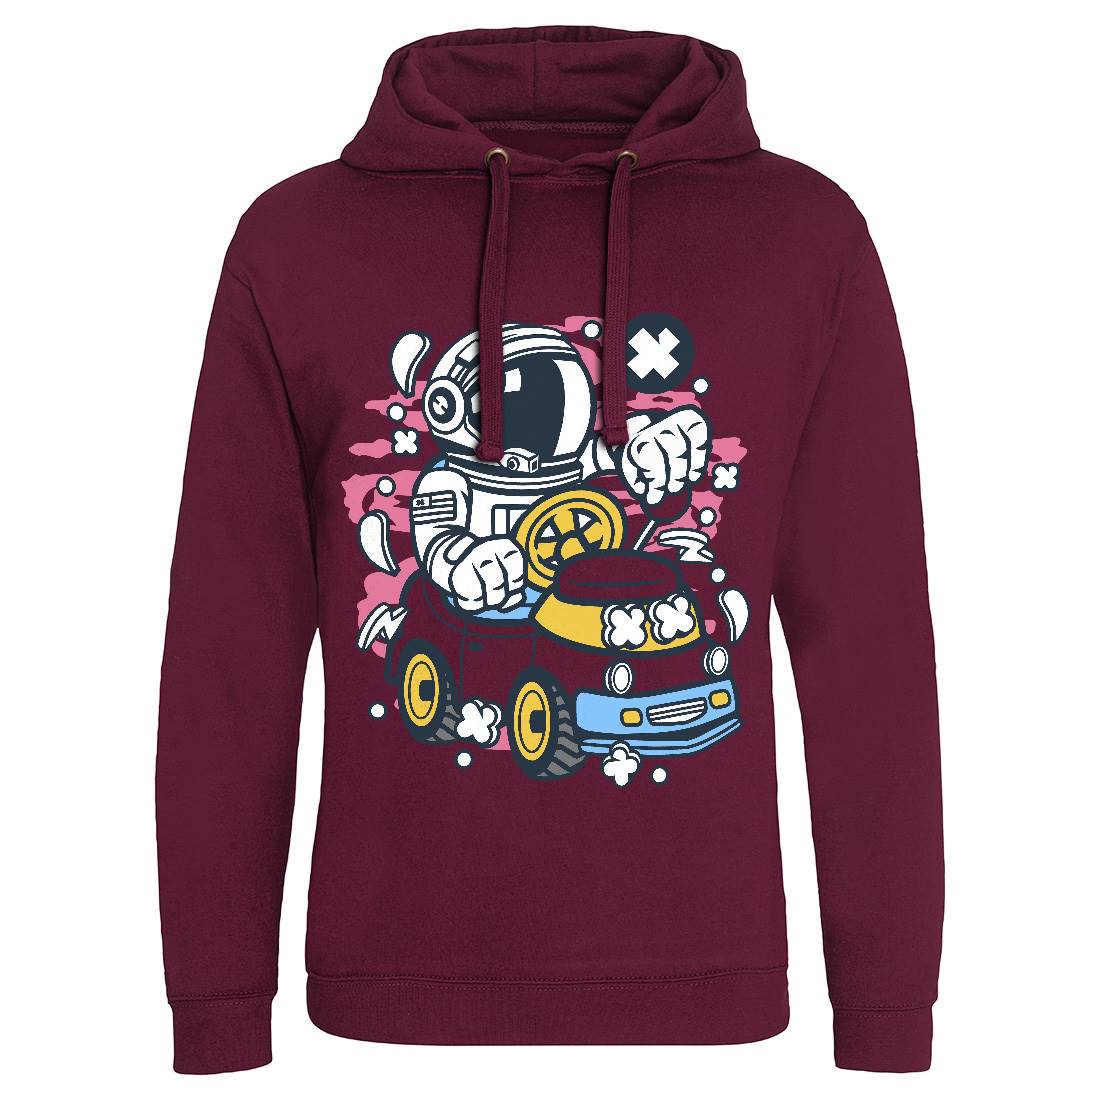 Car Toy Mens Hoodie Without Pocket Cars C045